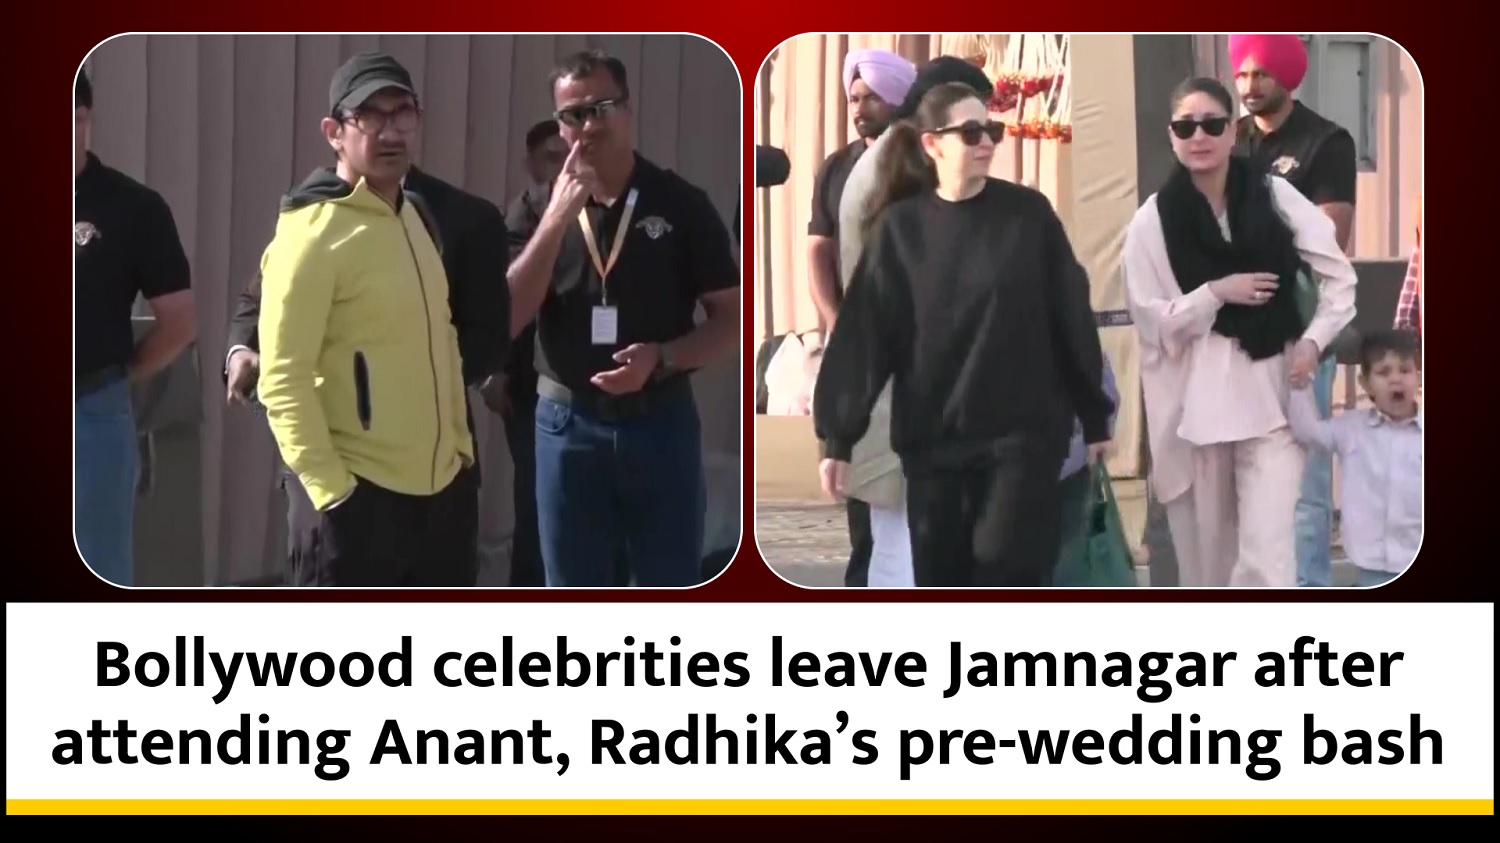 Bollywood celebrities leave Jamnagar after attending Anant` Radhika`s pre-wedding bash